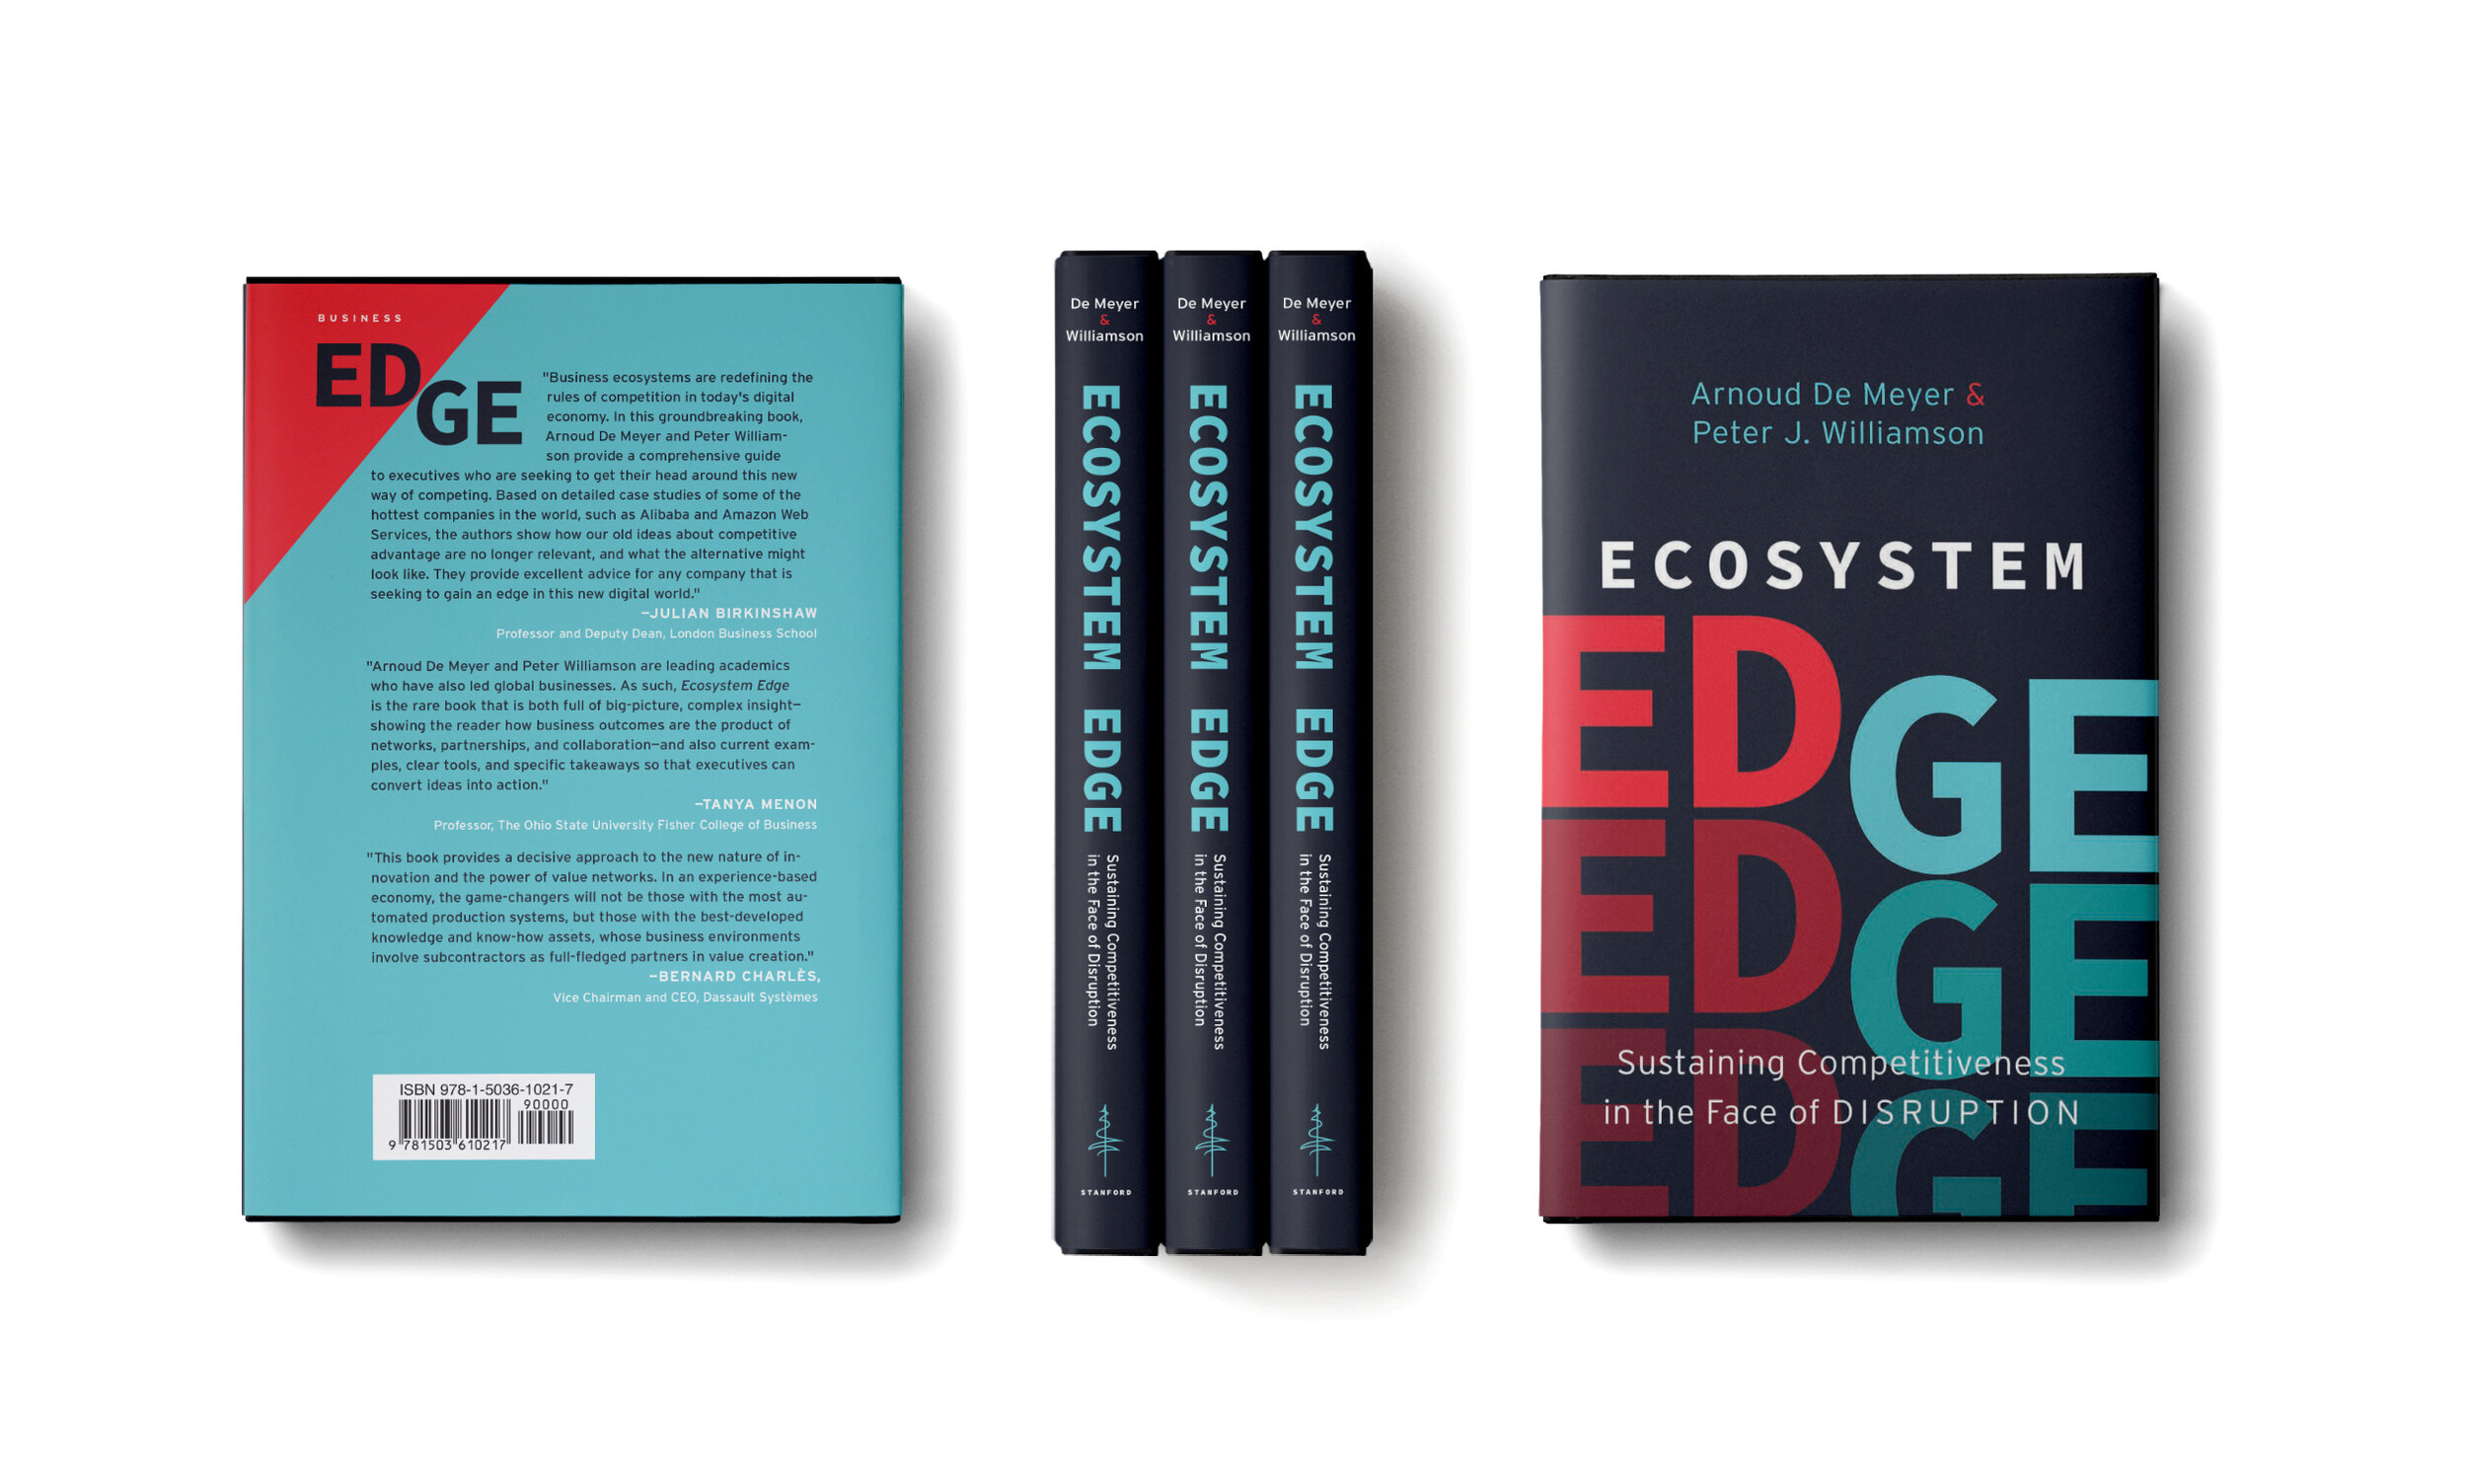 Ecosystem Edge, by Arnoud De Meyer and Peter Williamson (Stanford, 2020)